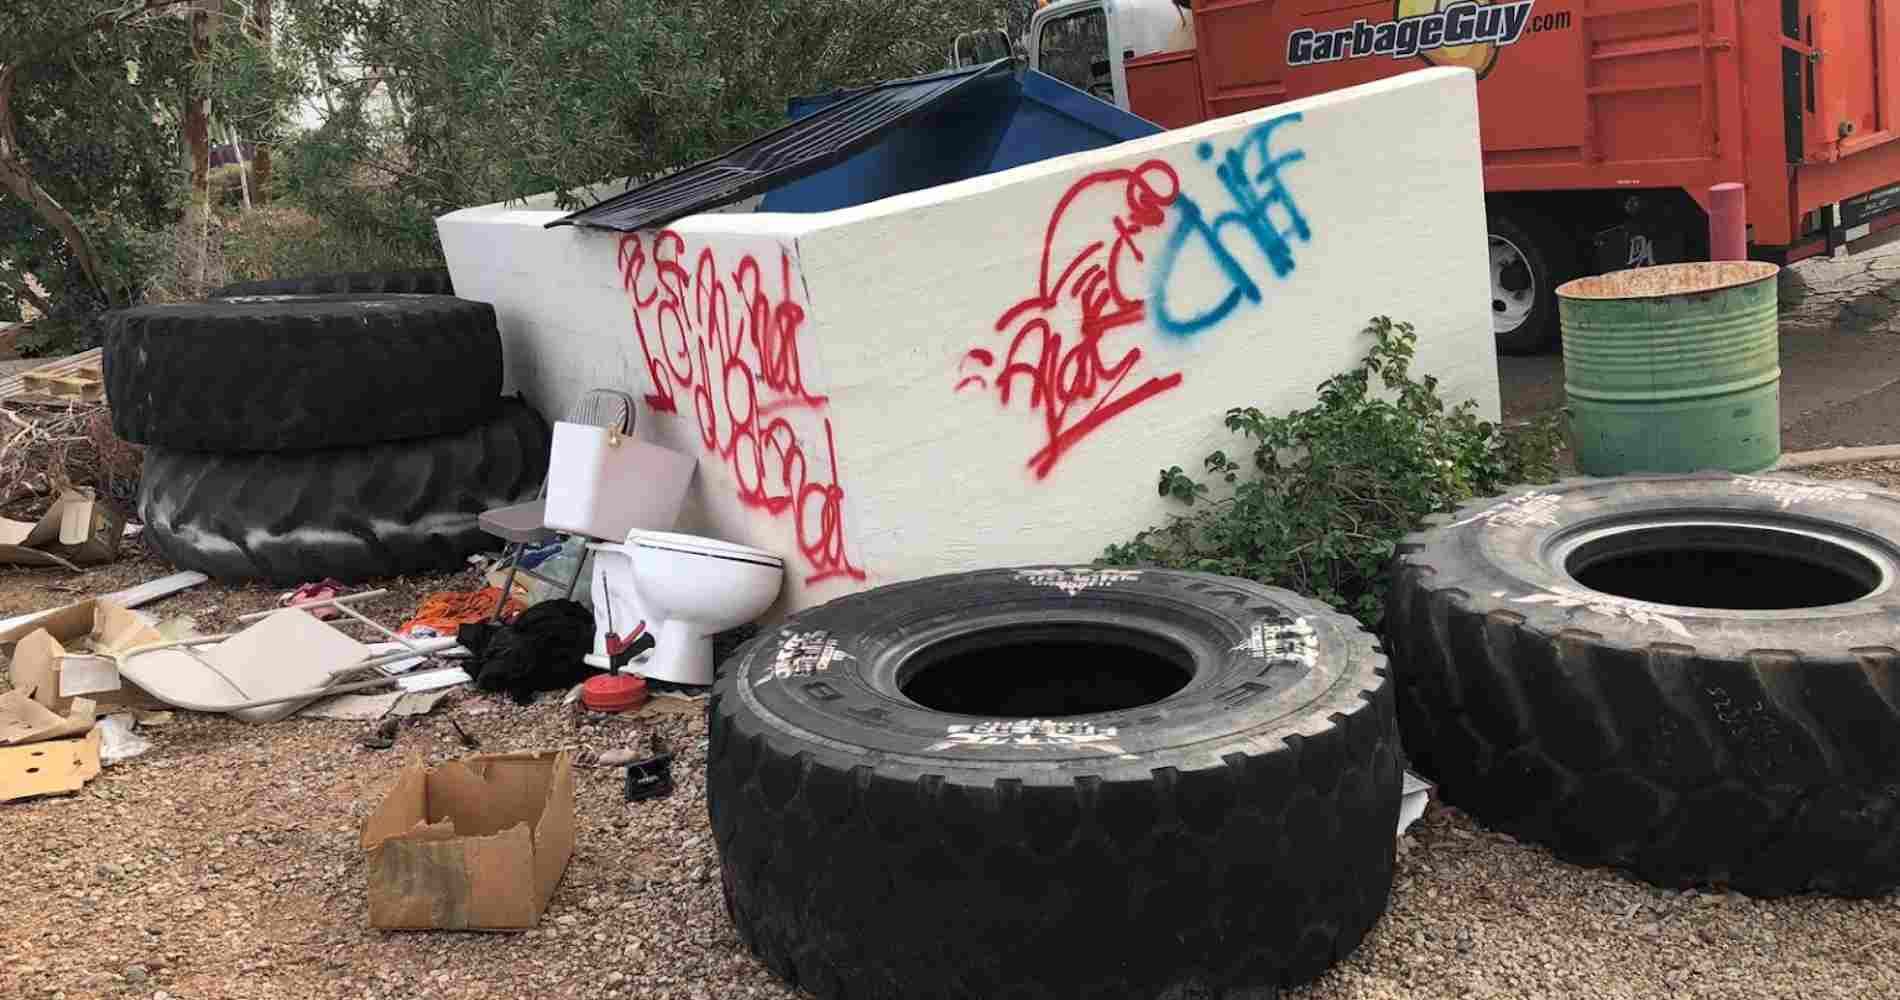 #1 for Tire Disposal in Phoenix, AZ with Over 1200 5-Star Reviews!